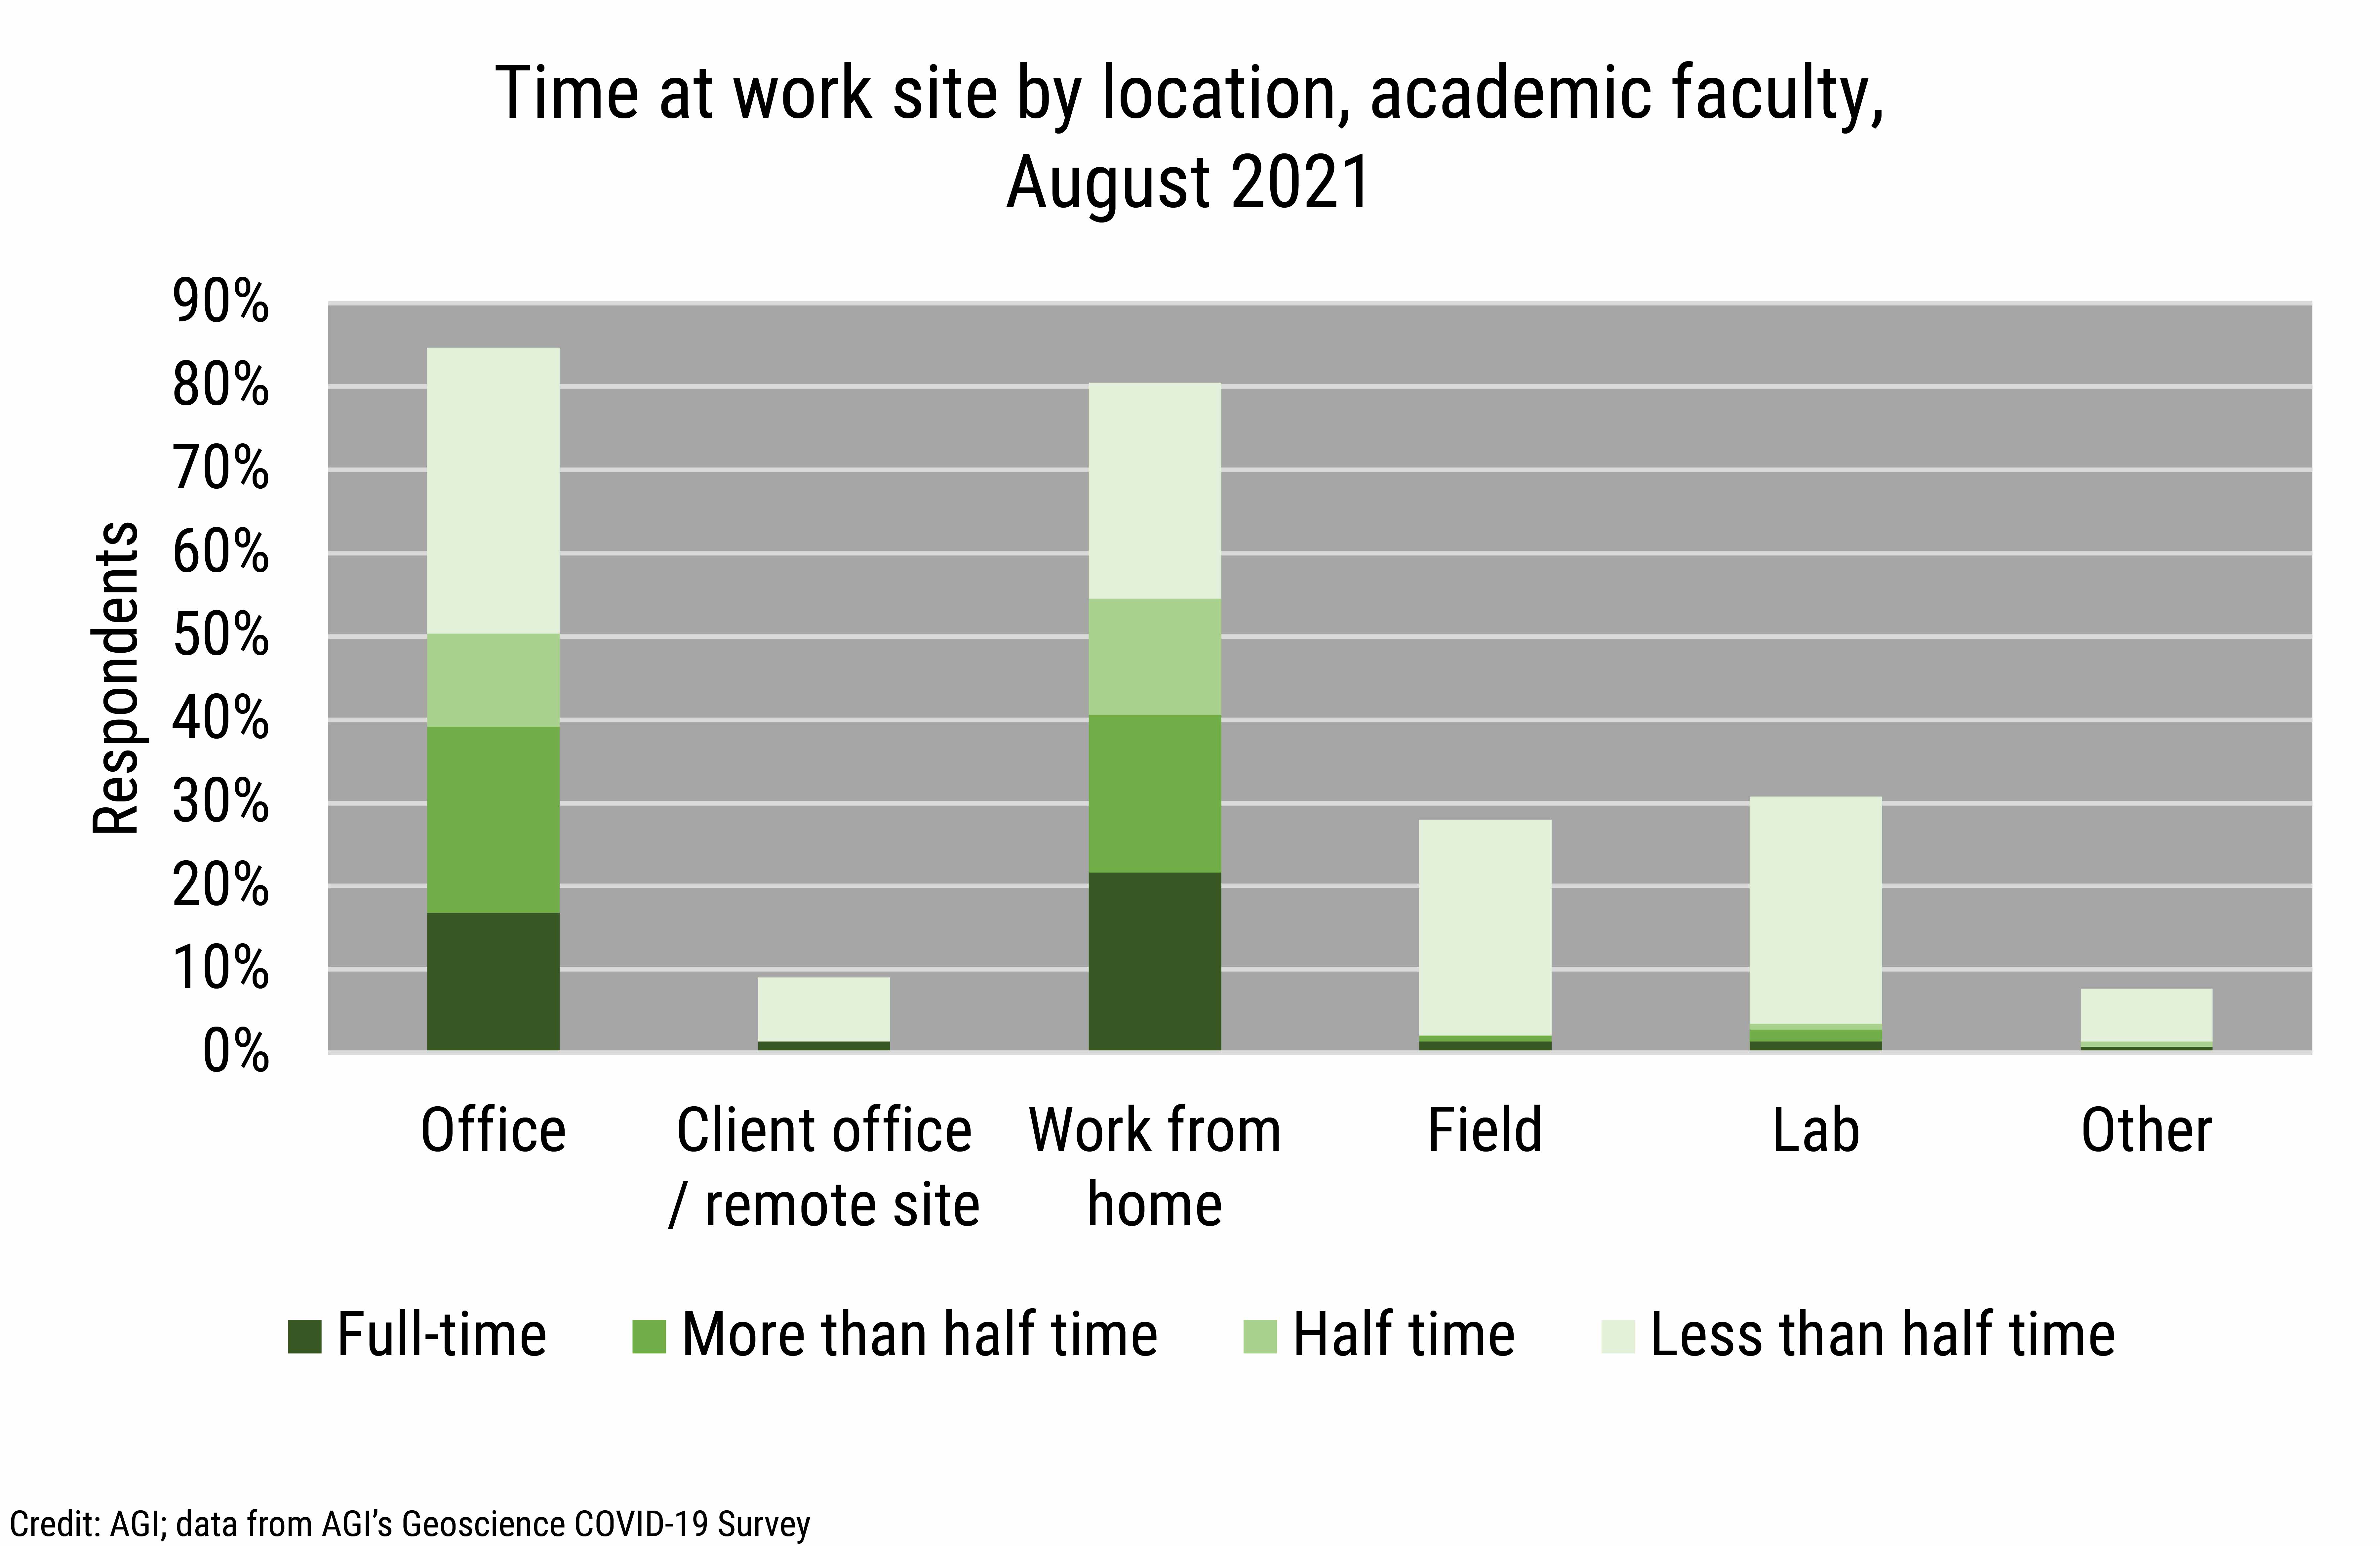 DB_2021-028 chart 06: Time at work site by location, academic faculty, August 2021 (Credit: AGI; data from AGI's Geoscience COVID-19 Survey)